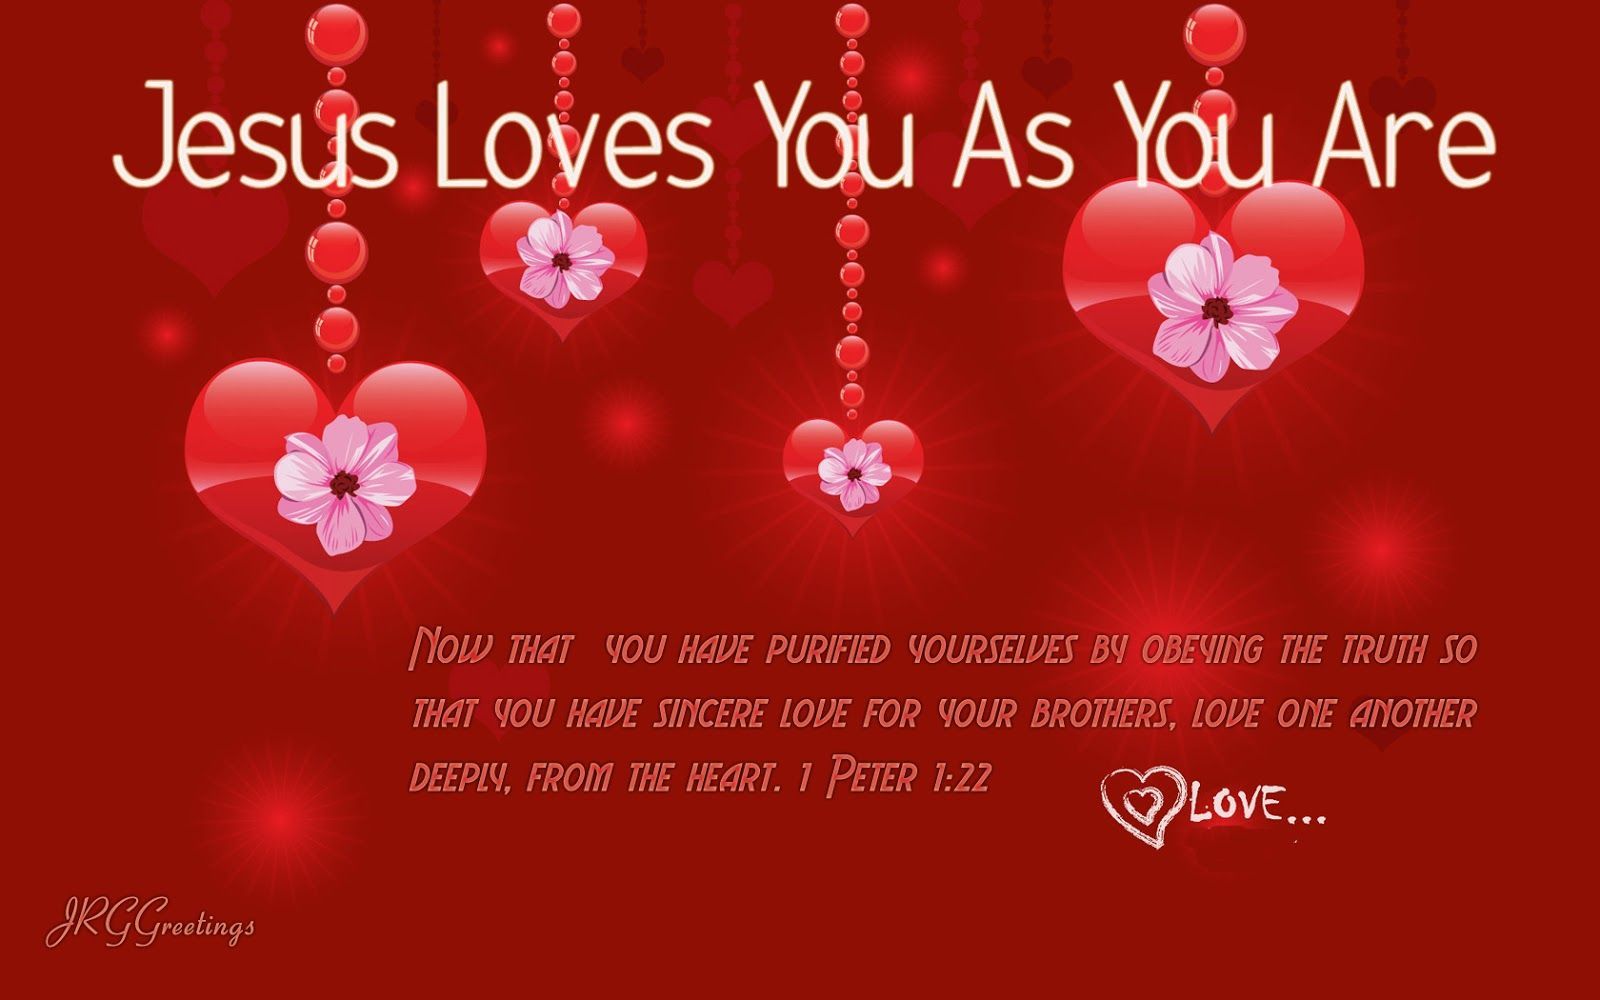 Christian Valentine's Day Greetings Free and Wallpaper. Valentines day messages, Valentine's day quotes, Christian valentines